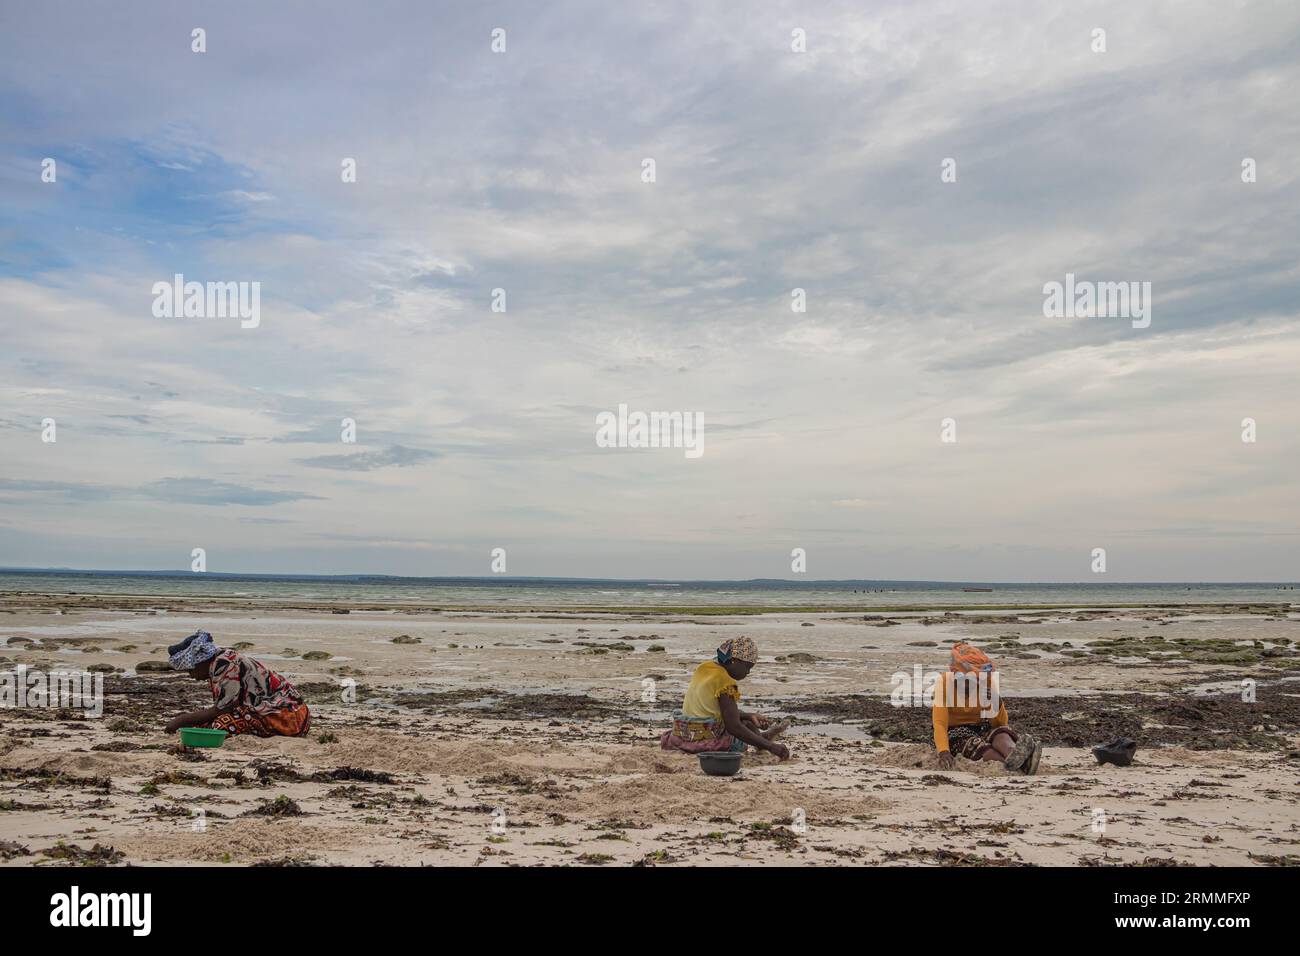 Group of woman from small African village in Mozambique at the shore of Indian ocean, collecting colorful stones and shells during low tide Stock Photo